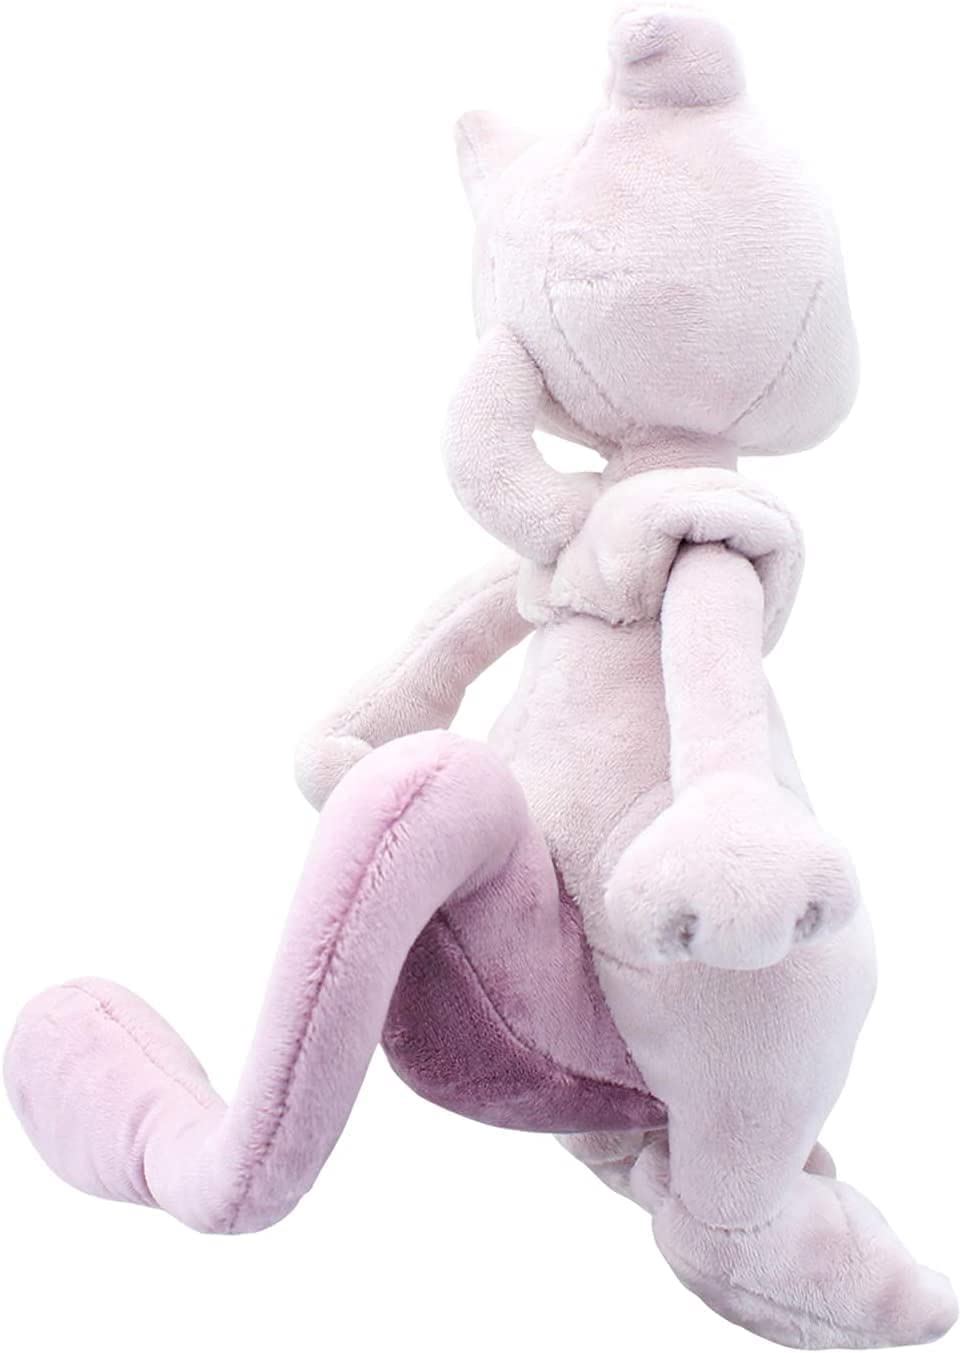 Sanei All Star Collection 10 Inch Plush - Mewtwo PP024